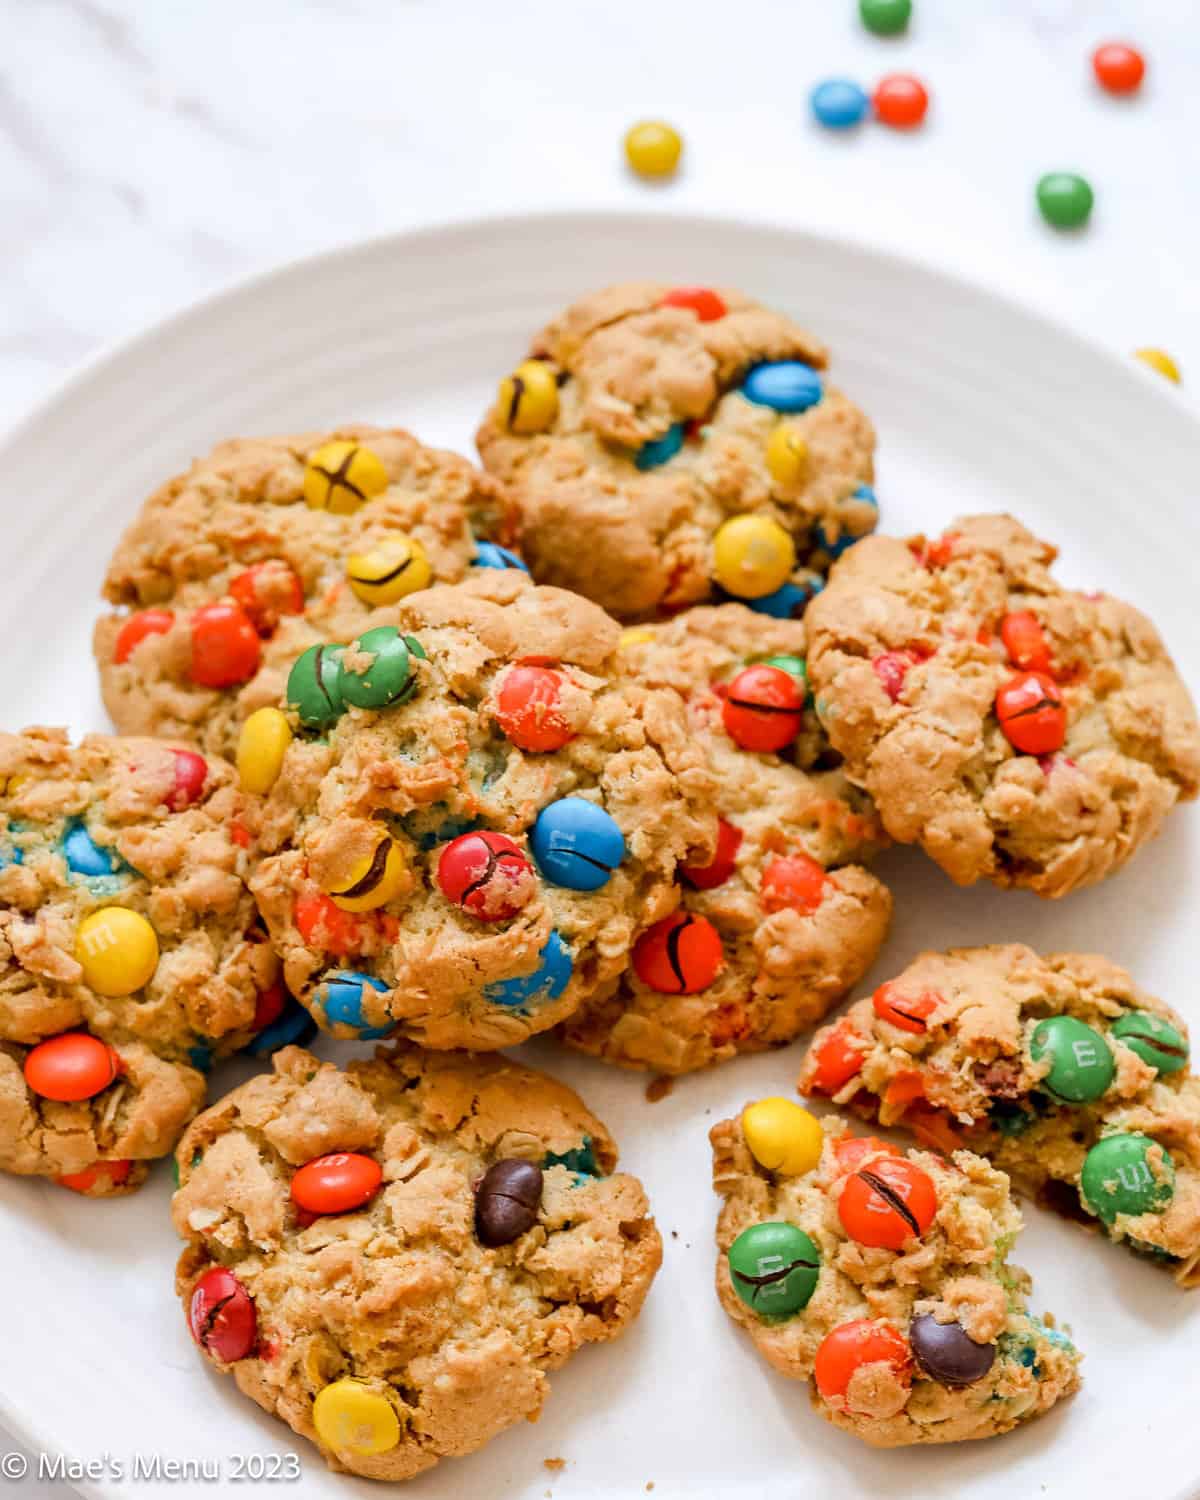 pile of oatmeal M&M cookies on white plate, corner cookie broken in half and blurred M&Ms in background.